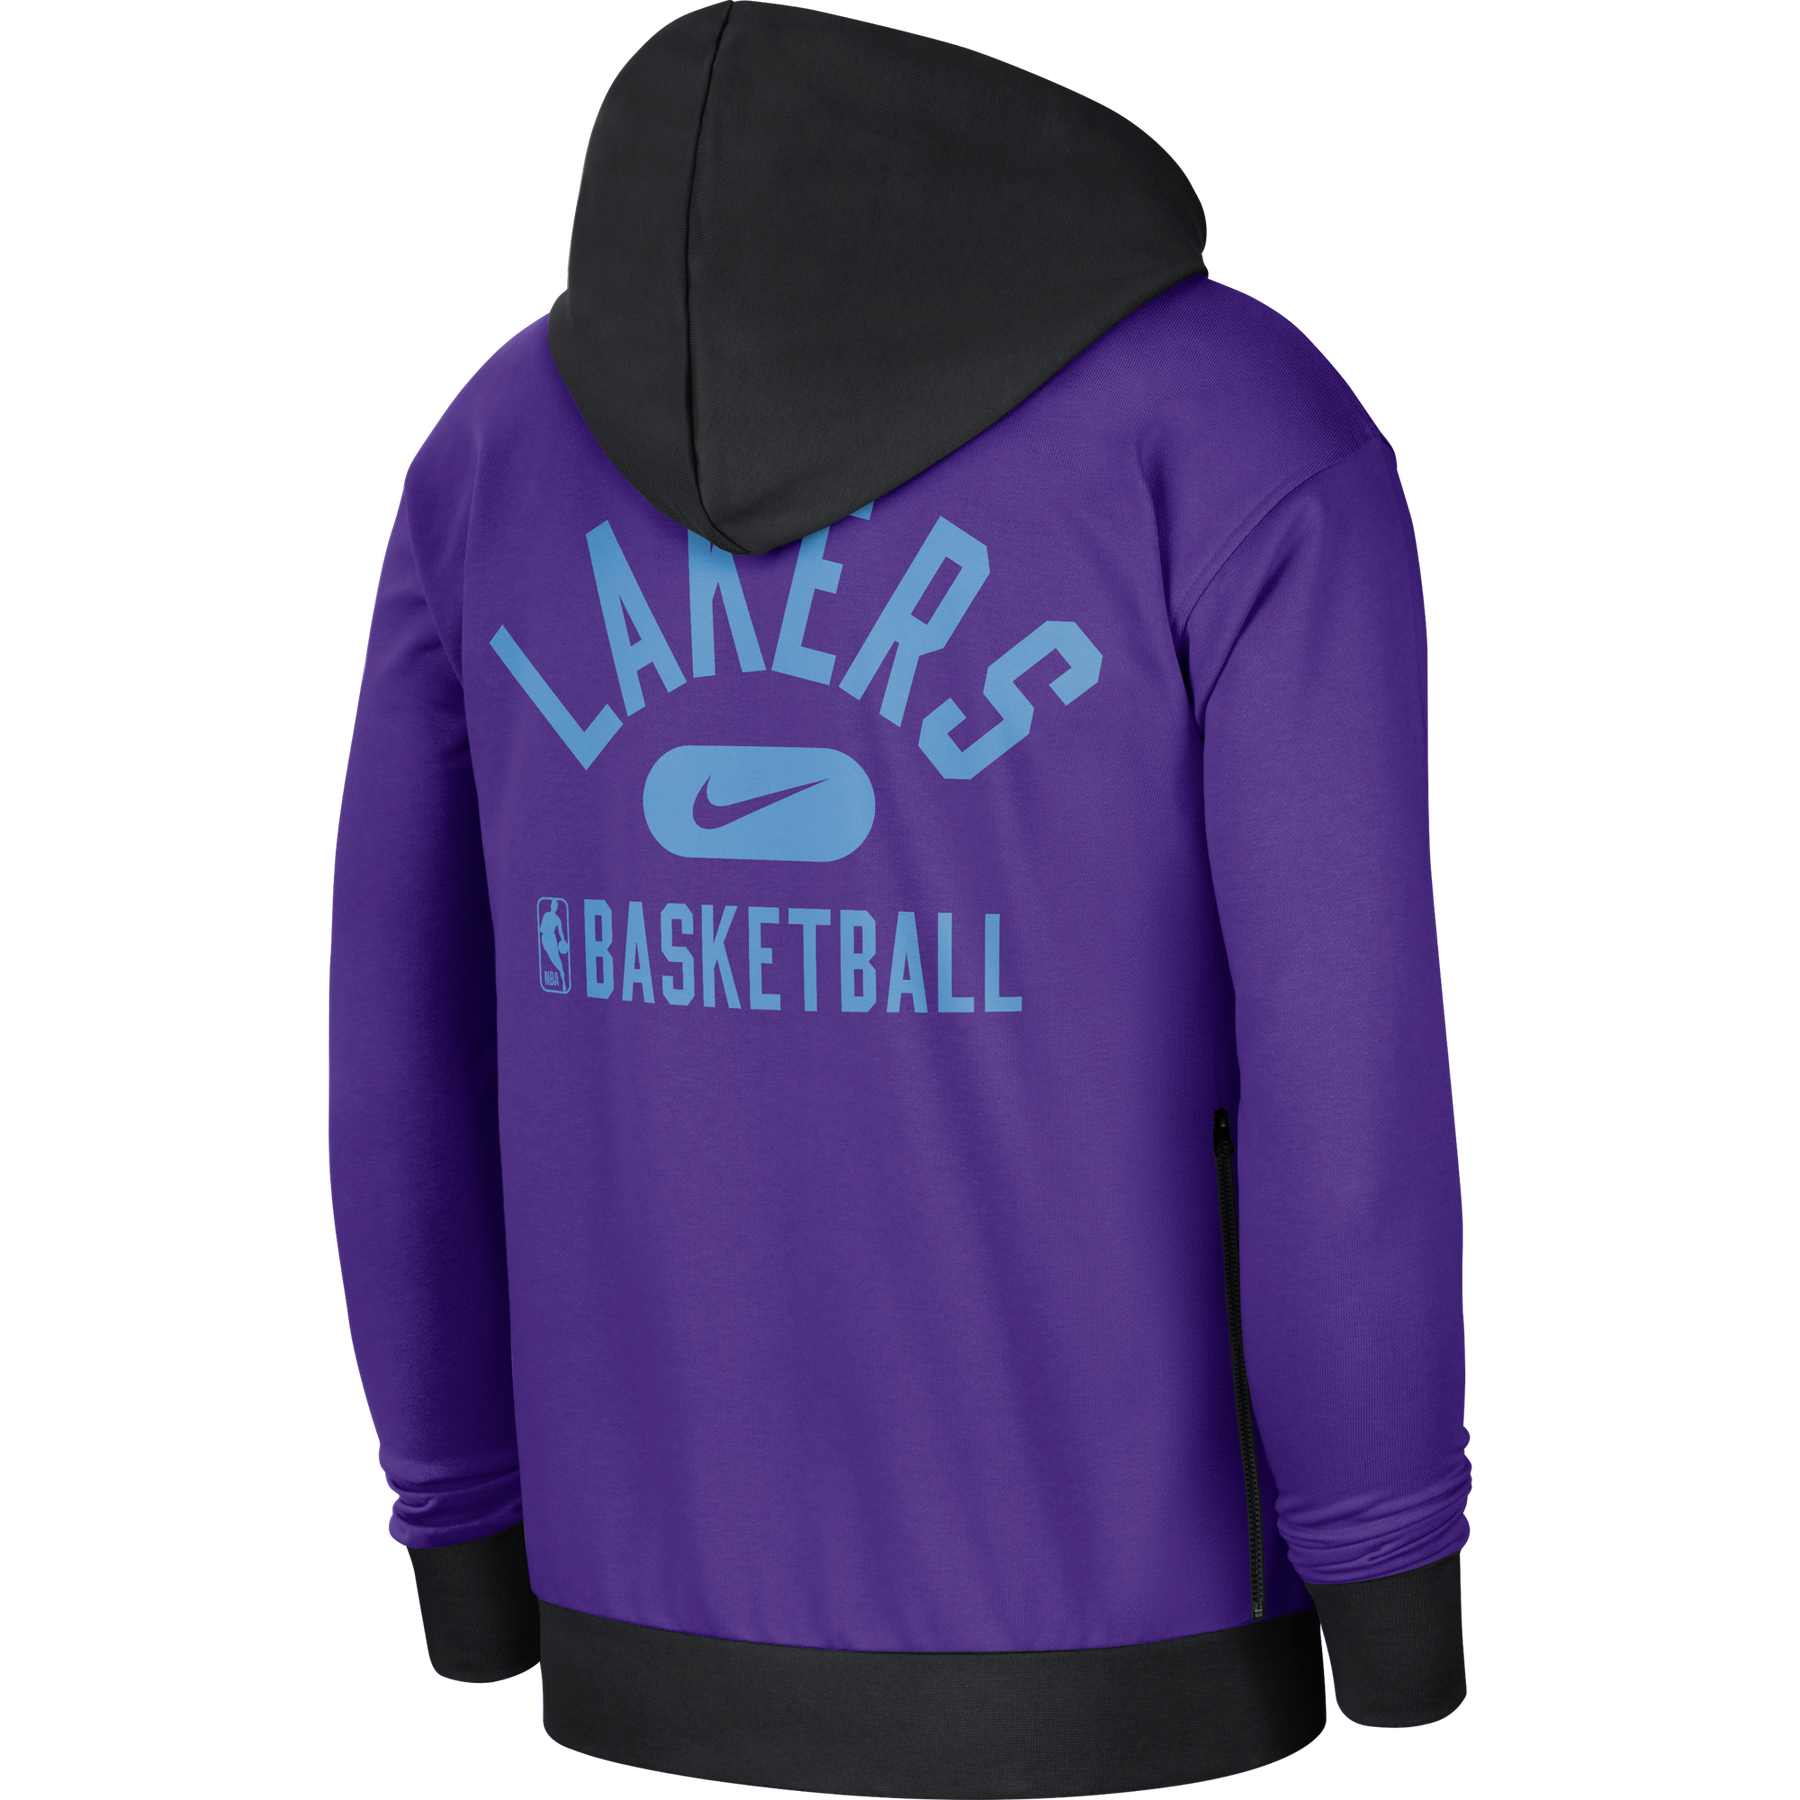 lakers hoodie city edition